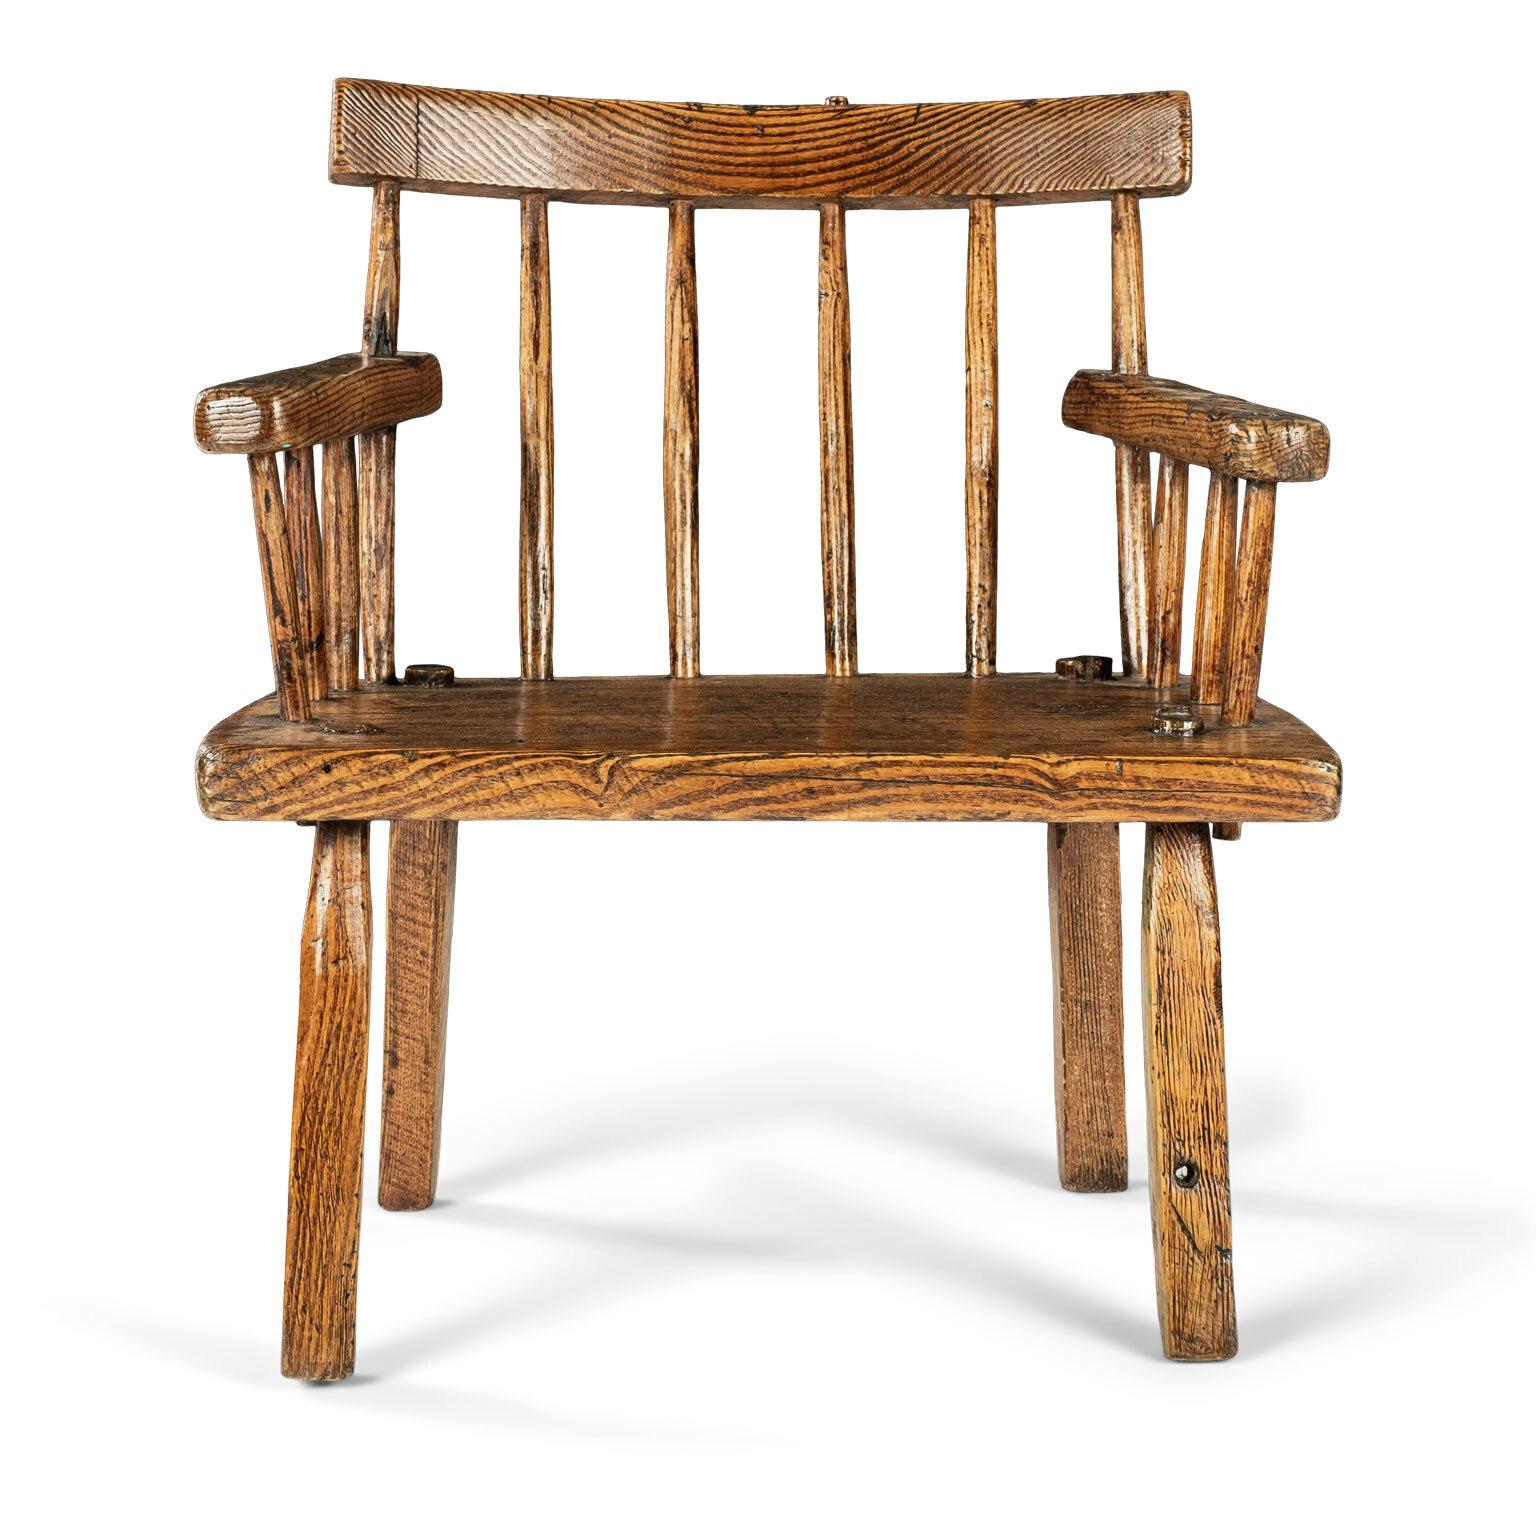 Irish ash comb back armchair dating to the 19th century. Curved top rail, carved stick back, splayed arms, wedge seat and splayed squared legs. Traces of early blue-green paint under seat. All joints tightened. Very sturdy and stable. Perfect